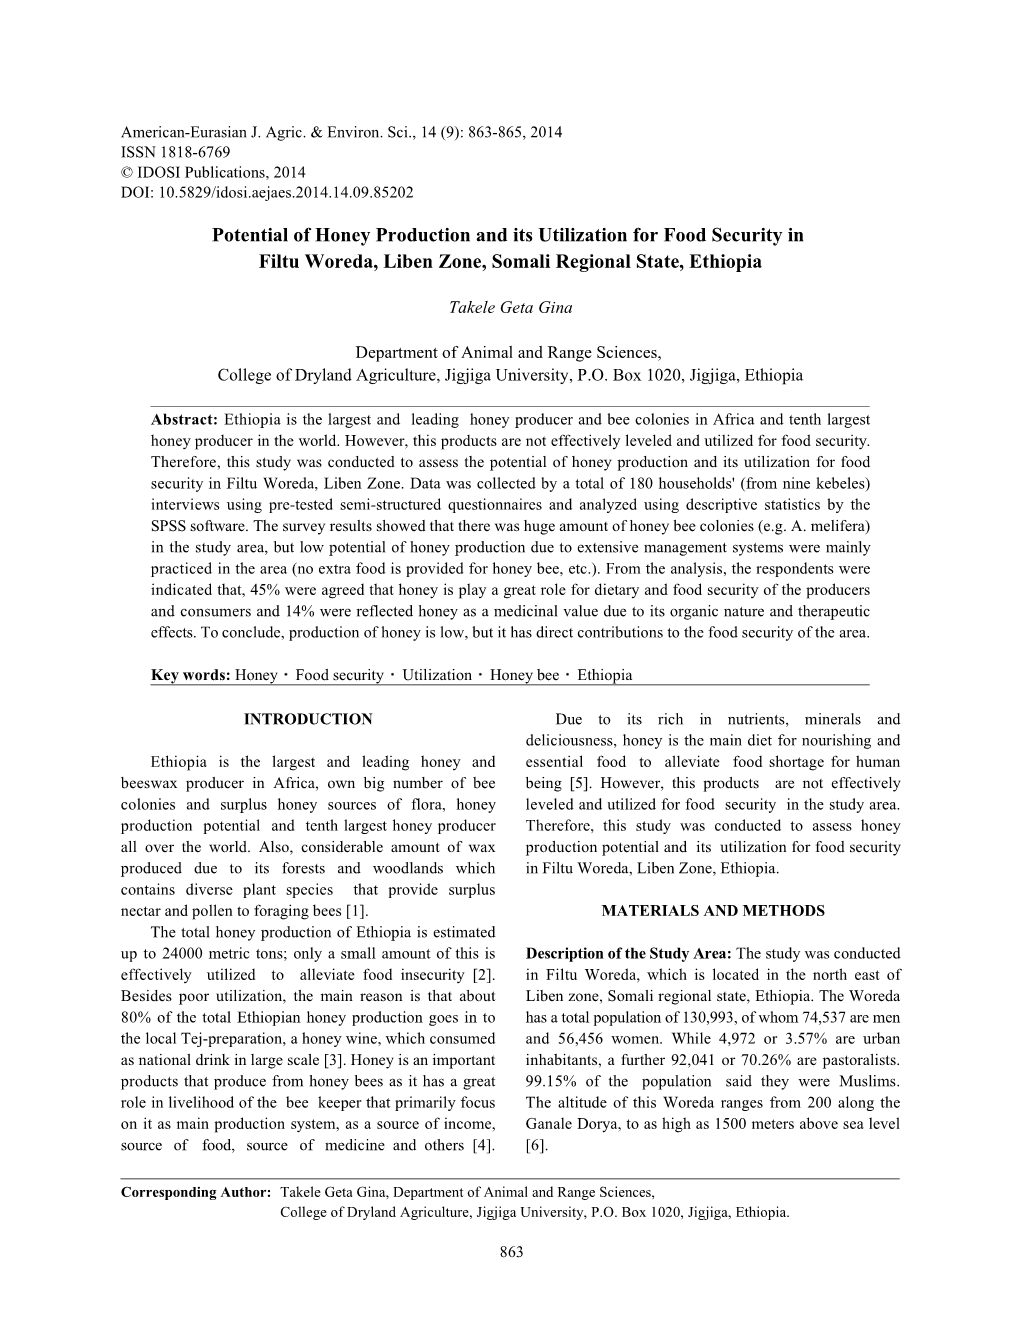 Potential of Honey Production and Its Utilization for Food Security in Filtu Woreda, Liben Zone, Somali Regional State, Ethiopia